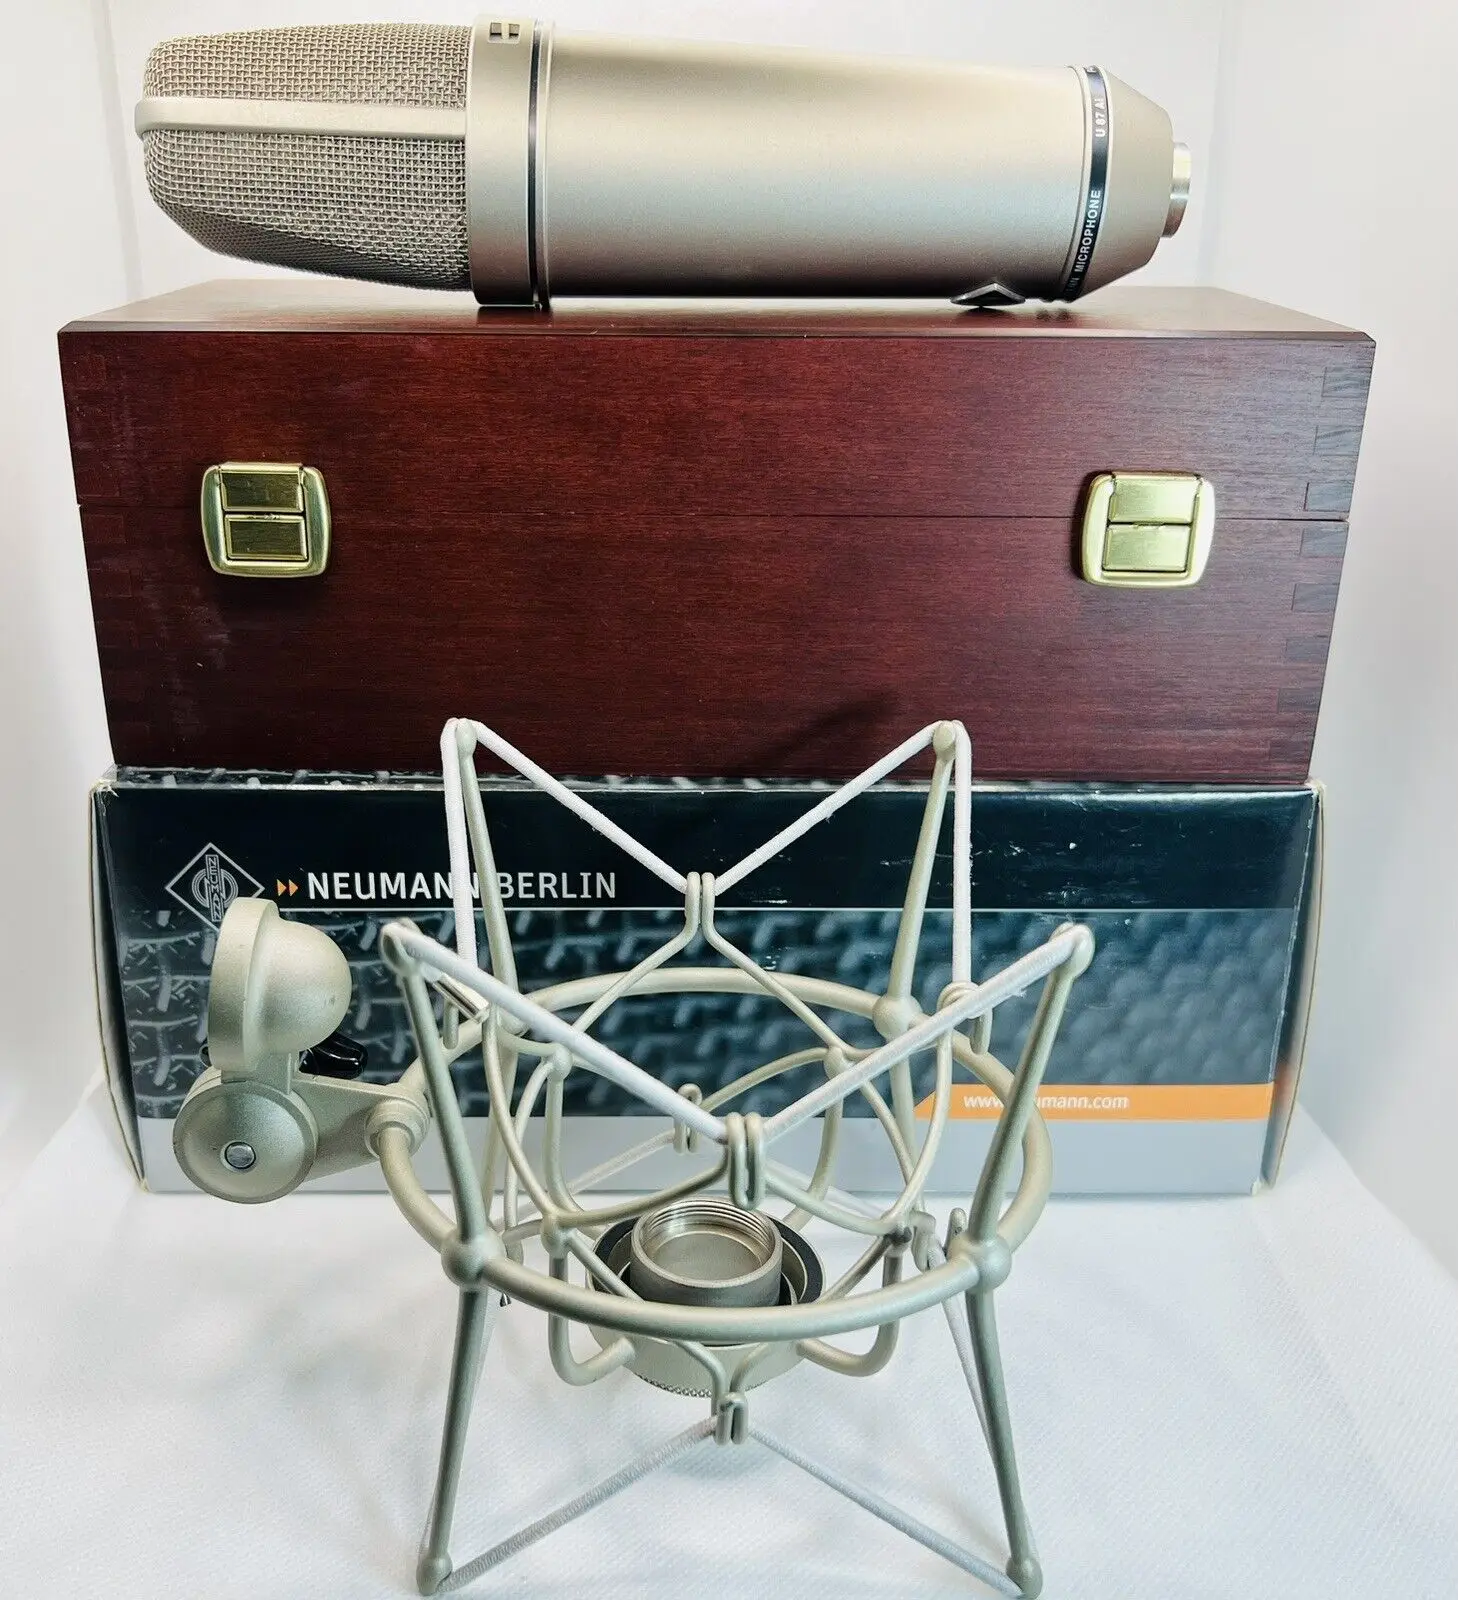 

Summer discount of 50% HOT SALES FOR BUY 5 GET 2 FREE Neumann u87ai condenser microphone recording wooden box